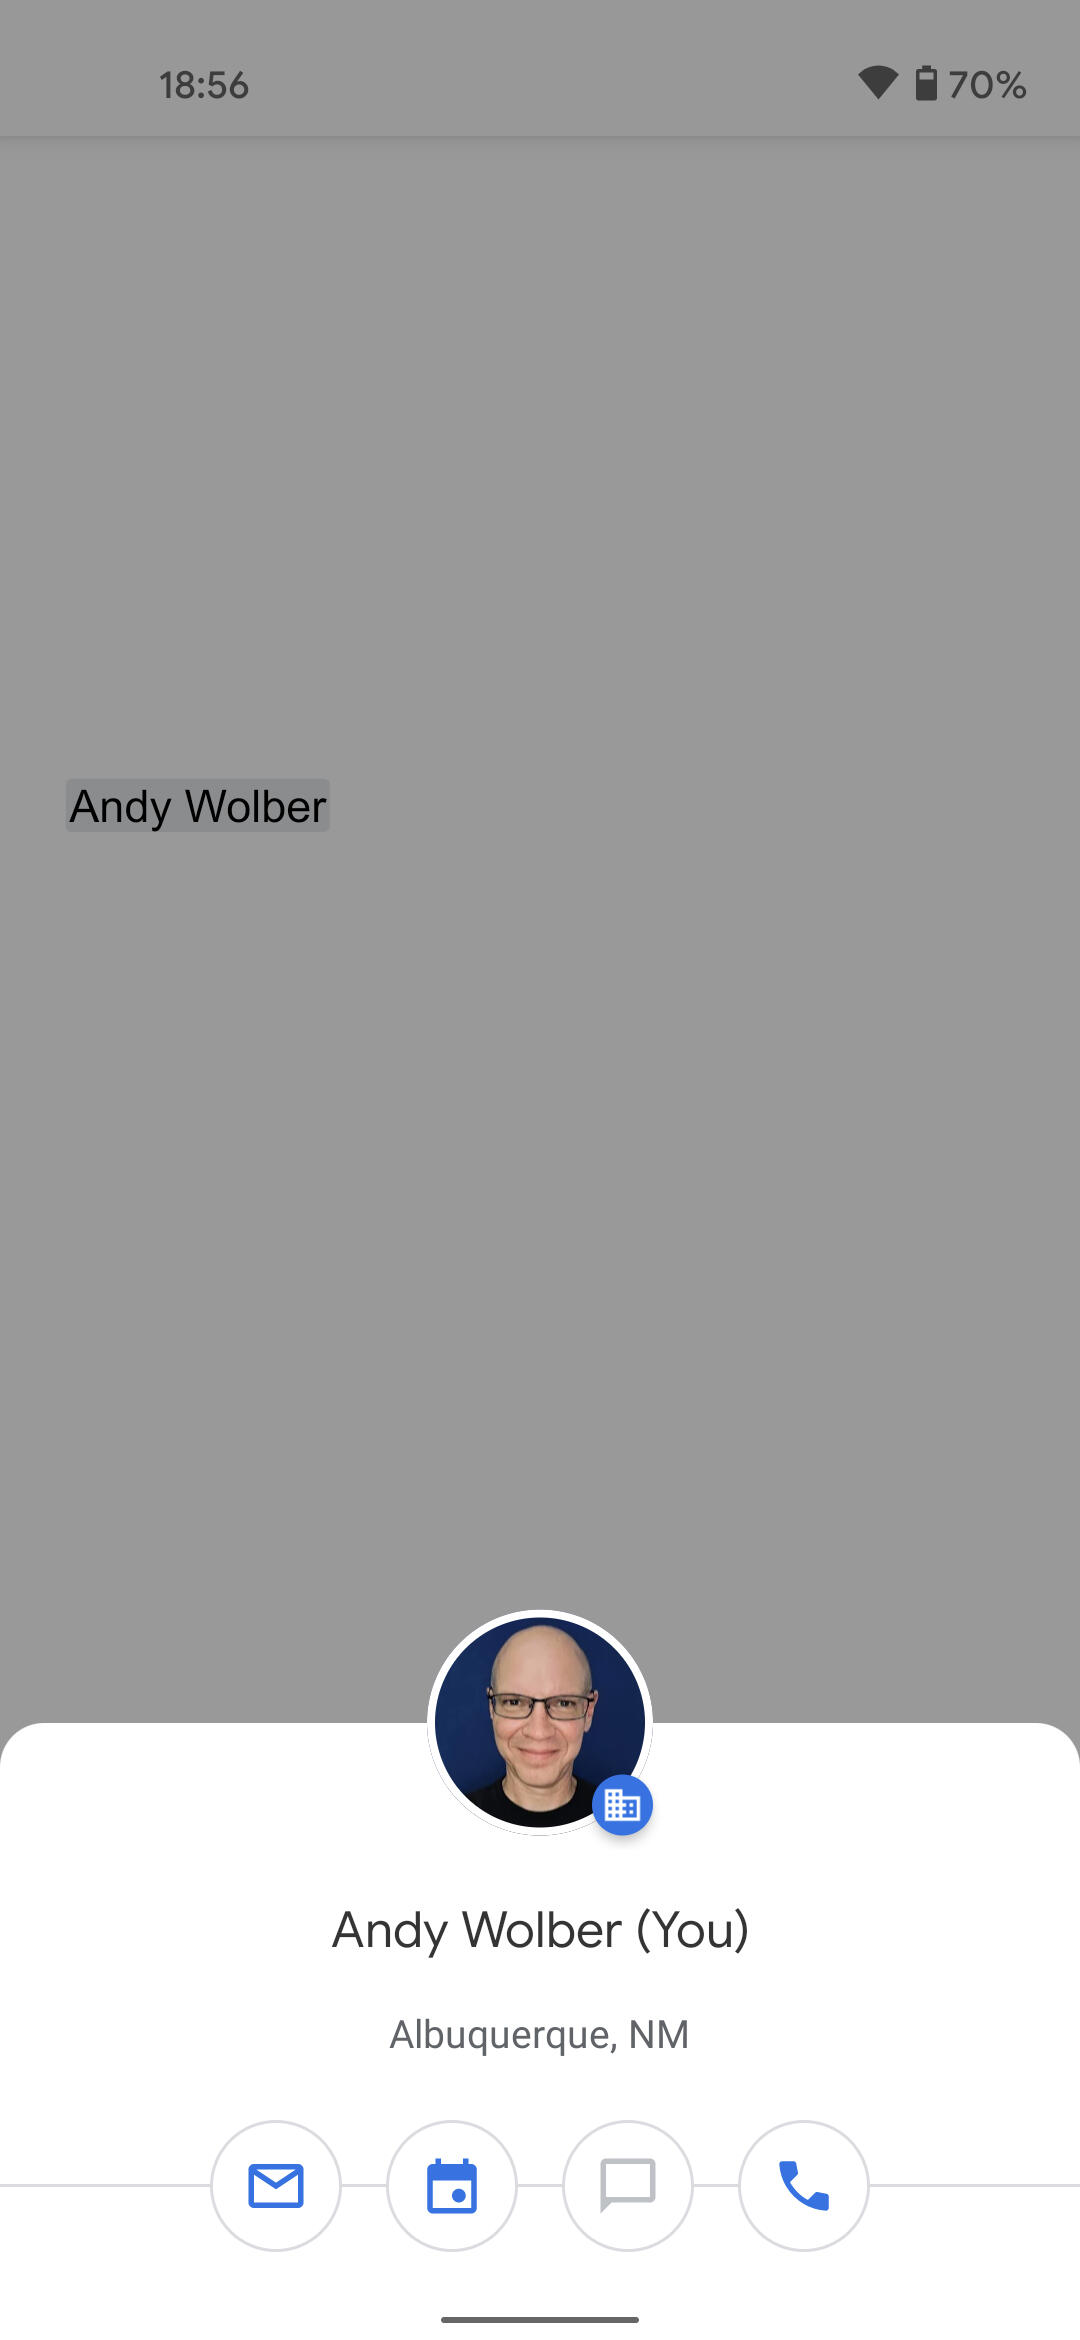 Screenshot of Google Doc on Android, taken immediately after the author tapped on the Andy Wolber contact link. It displays Andy Wolber (You) and Albuquerque, NM, with active email, calendar, and call buttons below. A chat button is displayed, but grayed out.